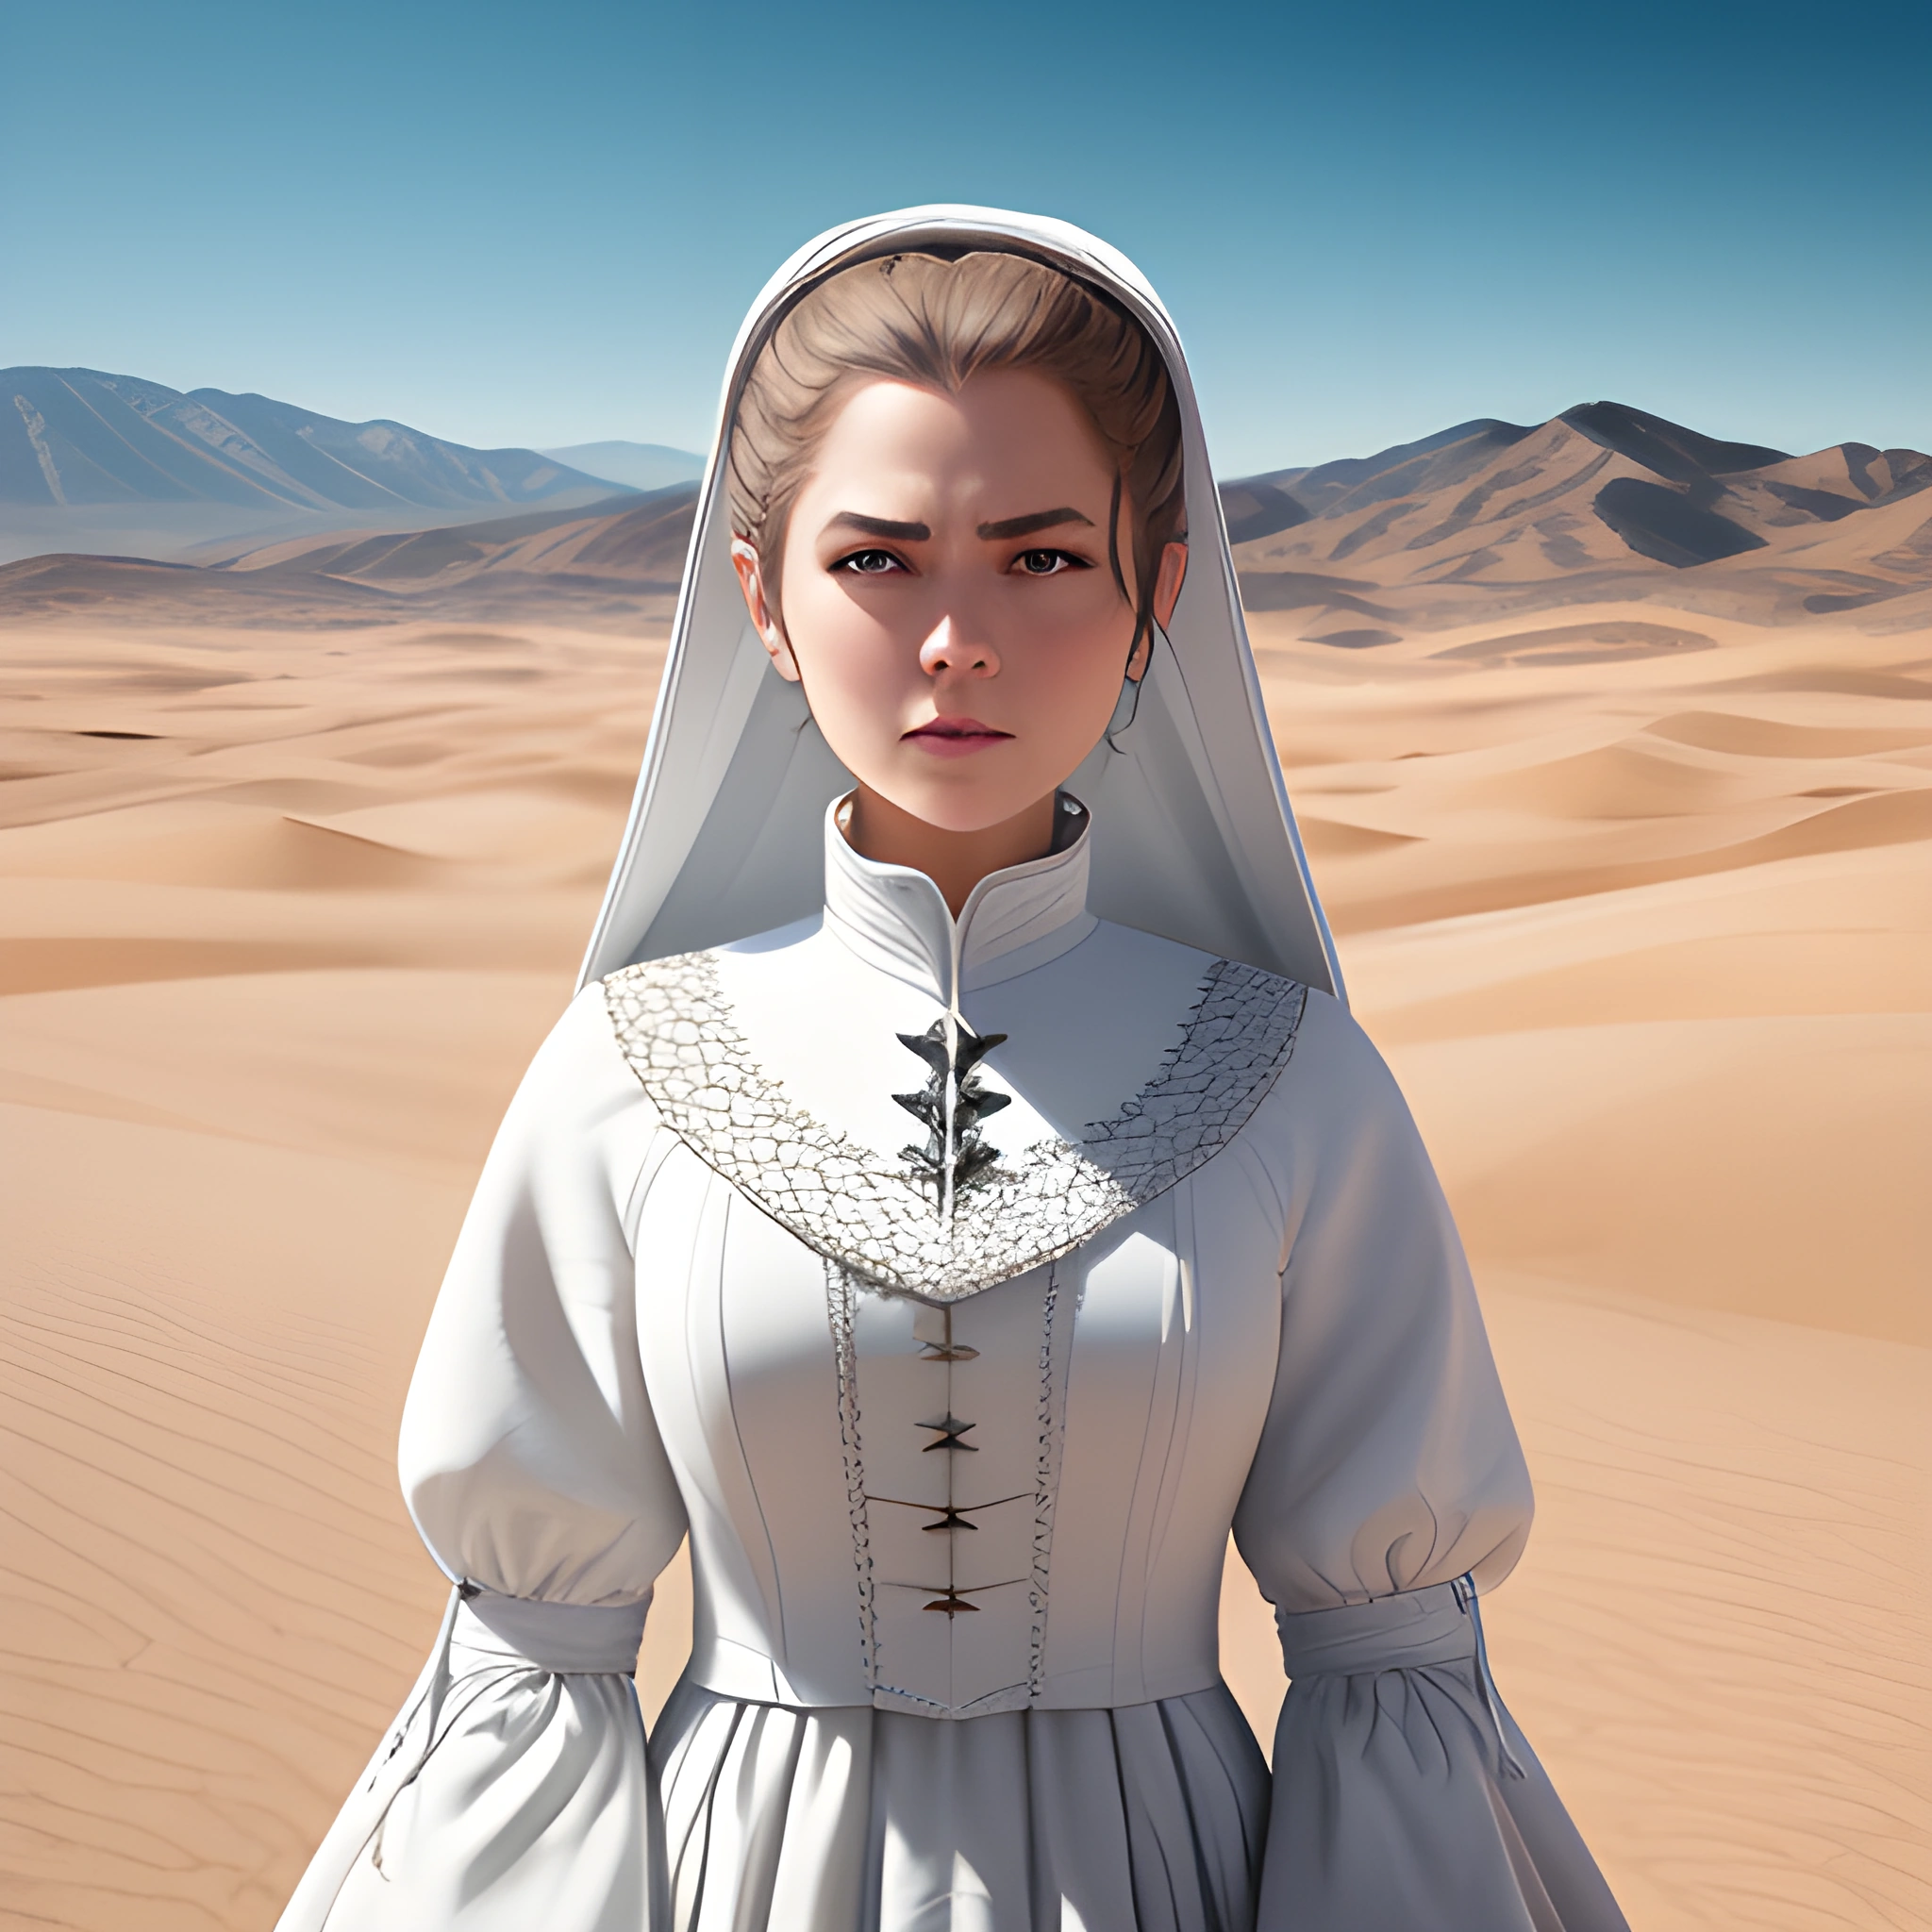 a woman in a white dress and a veil in the desert